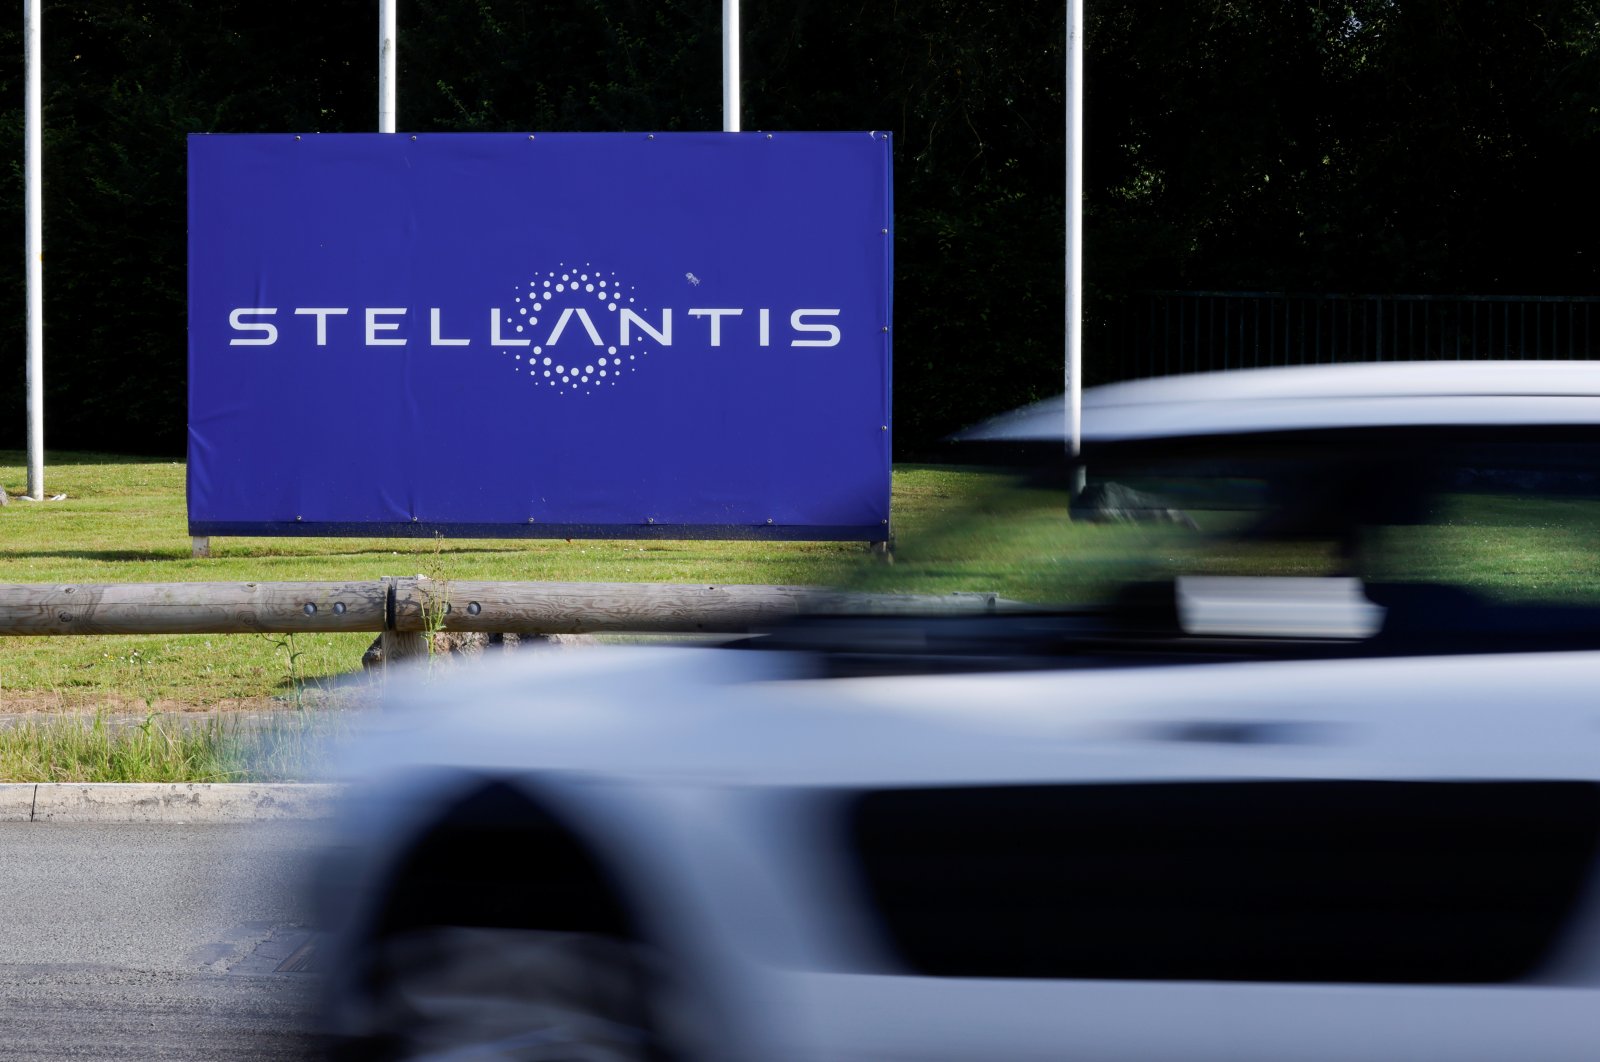 A view shows the logo of Stellantis at the entrance of the company's factory in Hordain, France, July 7, 2021. (Reuters Photo)